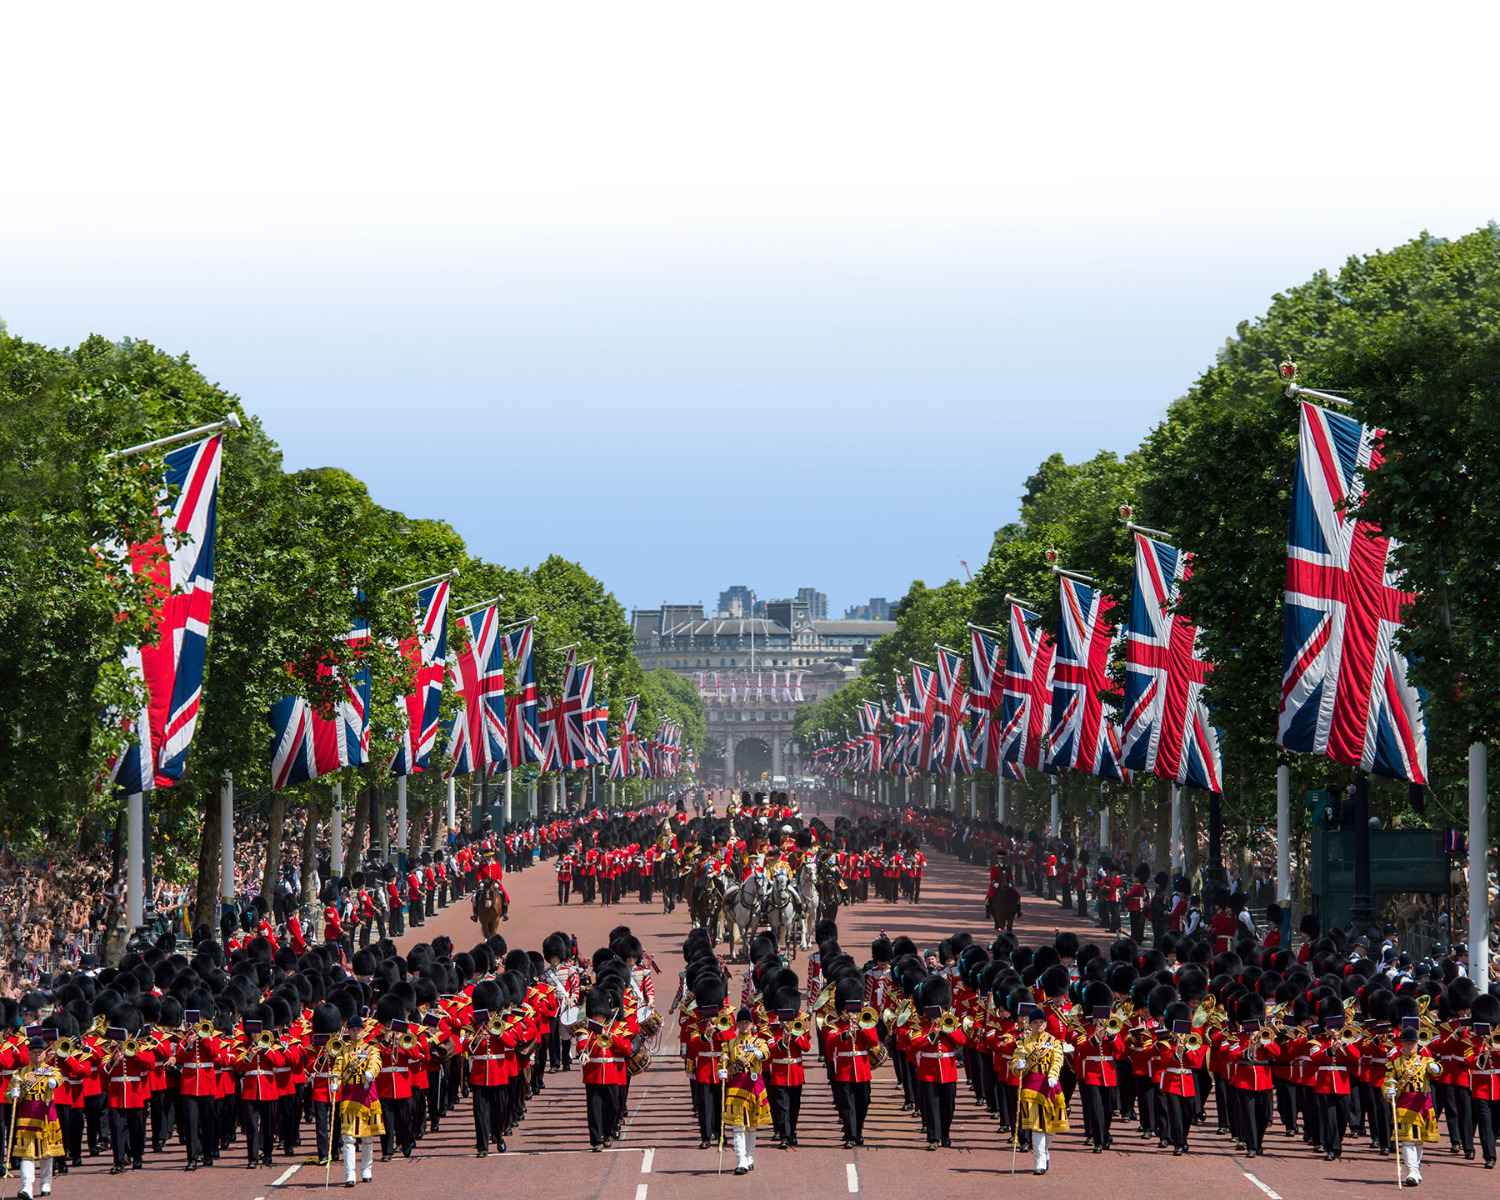 Soldiers of the Mass Bands and Household division marching in front of and behind HRH Queen Elizabeth returning back to Buckingham Palace.